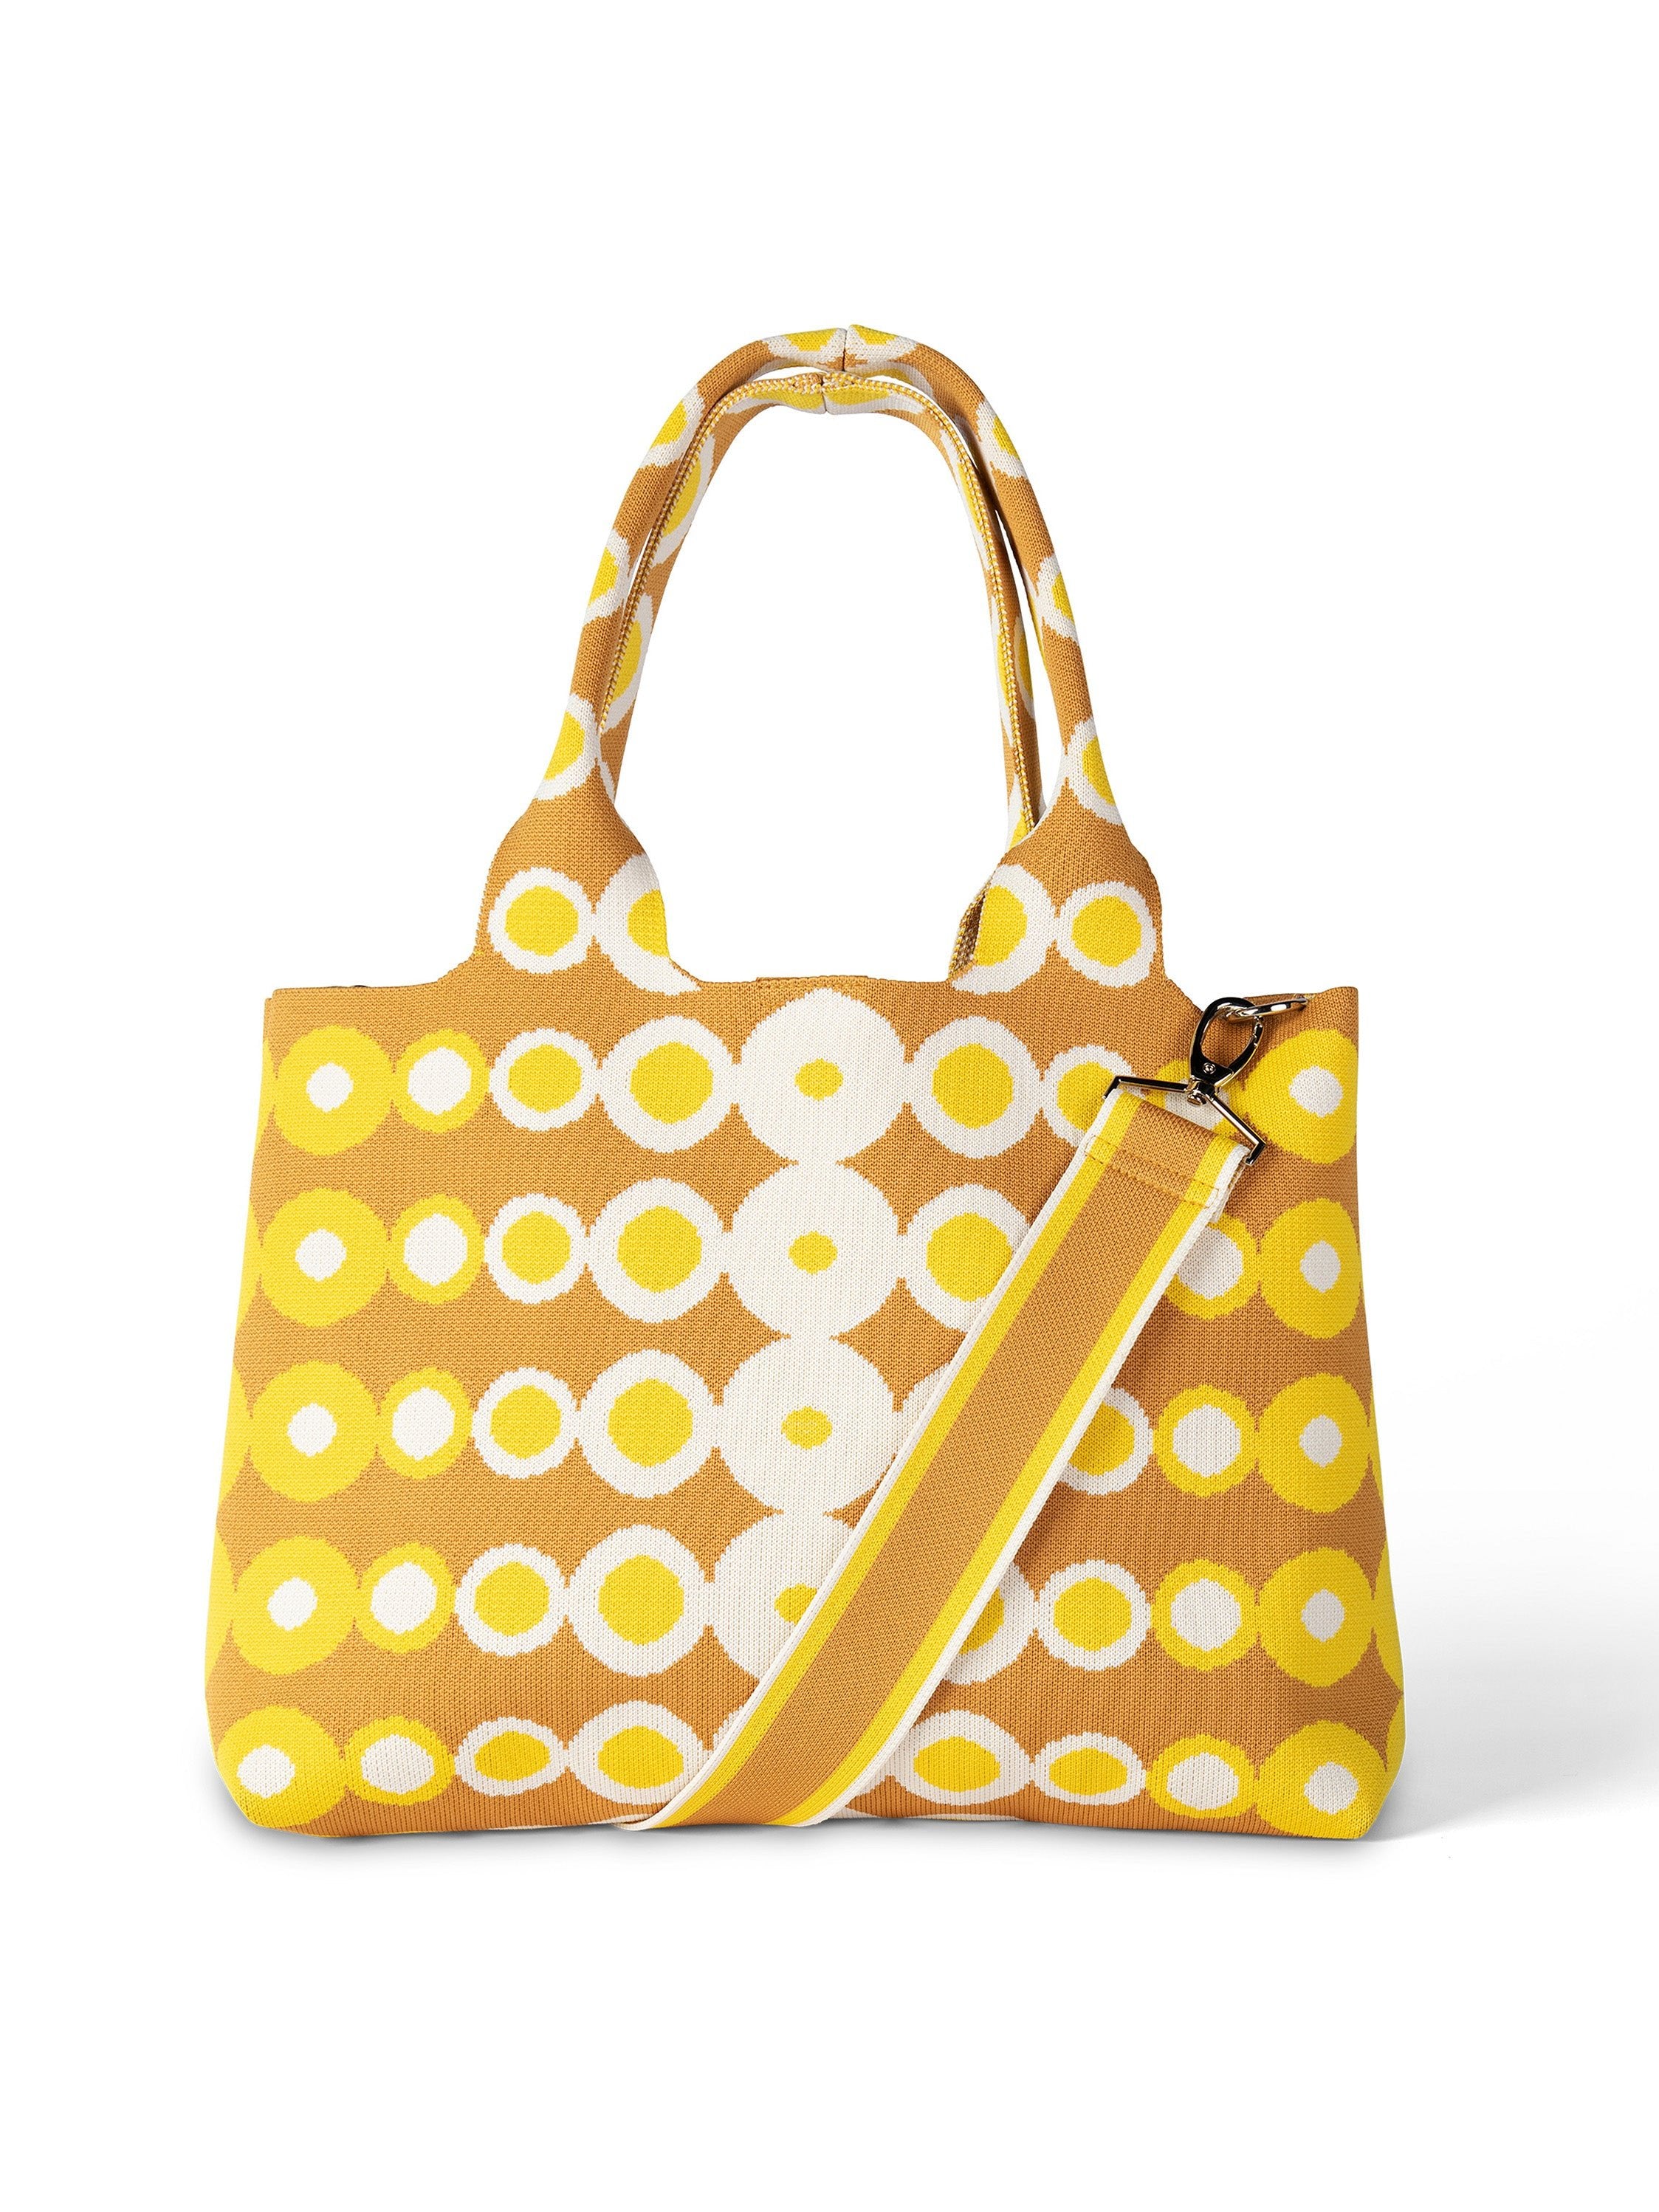 MARISOL tote Pacifica Yellow - Lesley Evers-Accessories-Giftable-Gifts